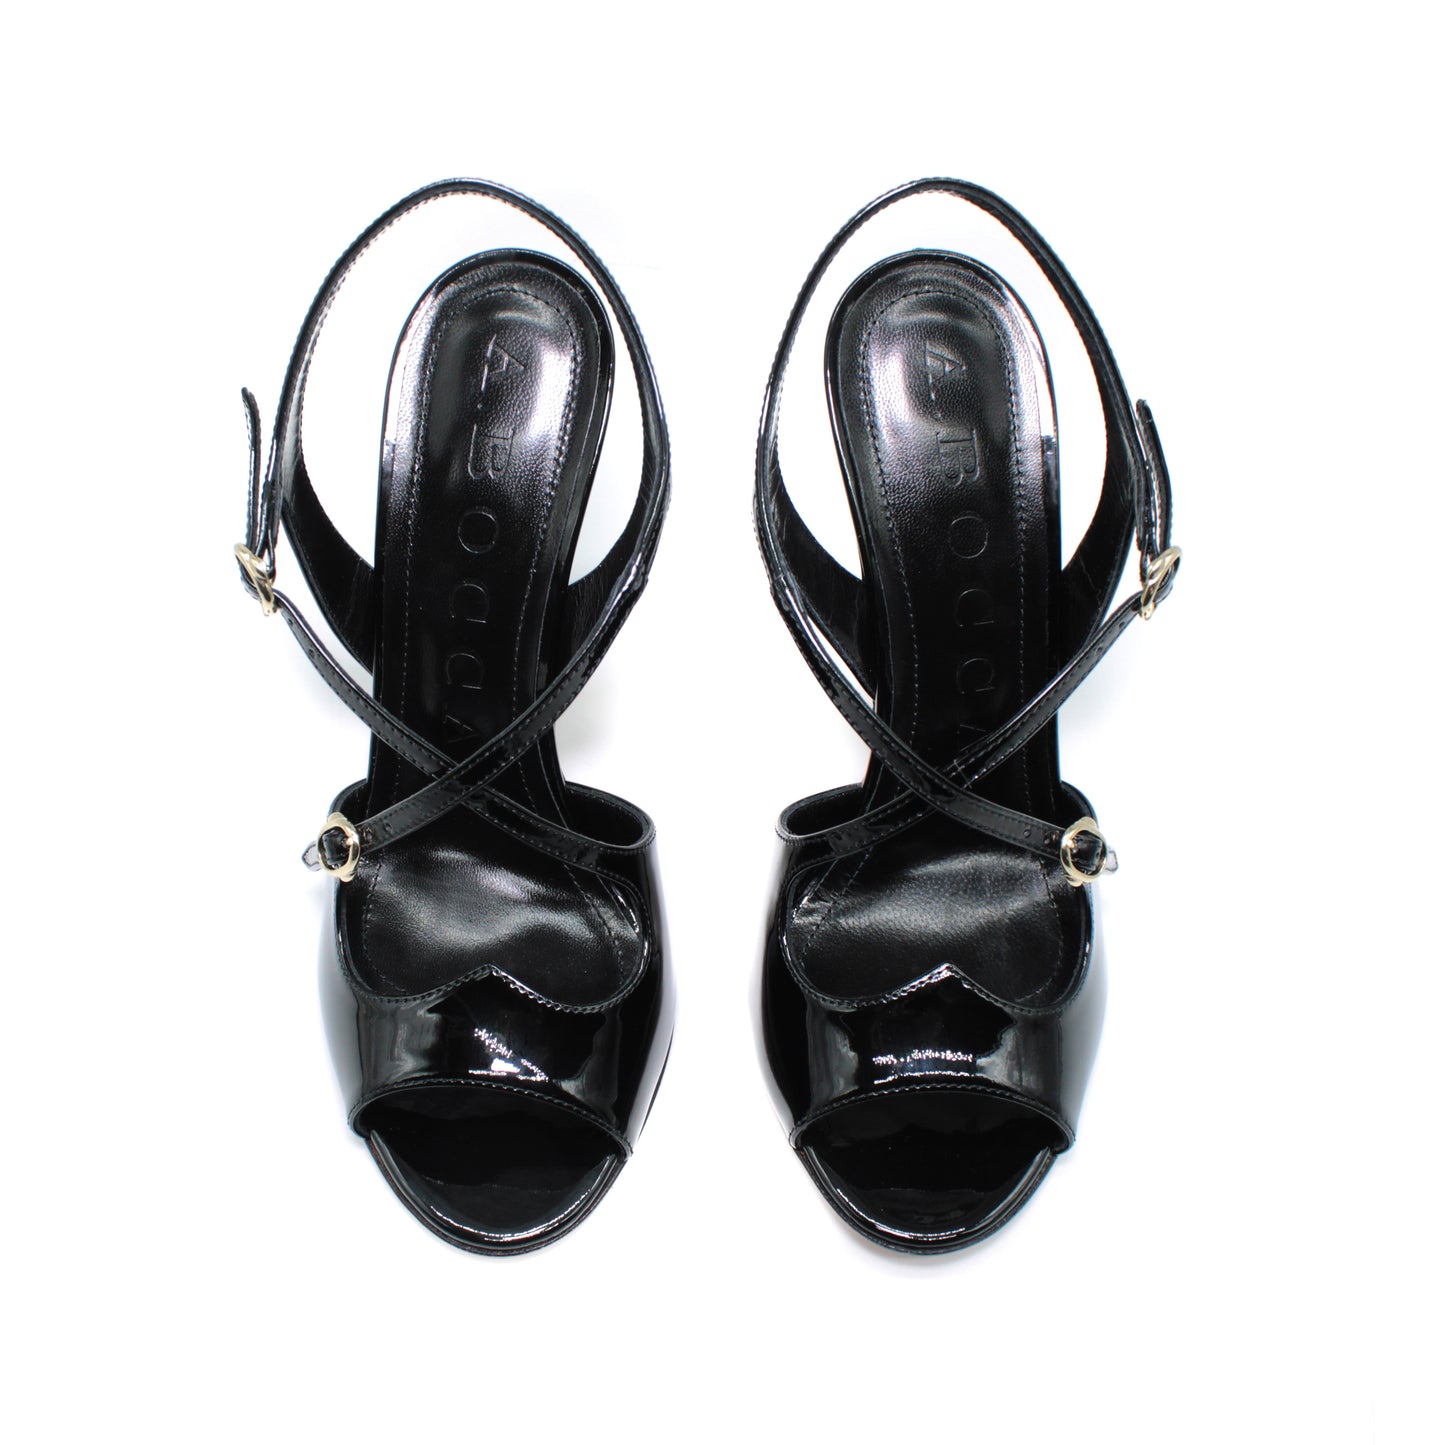 Sexy Sandal Two for Love in black patent leather